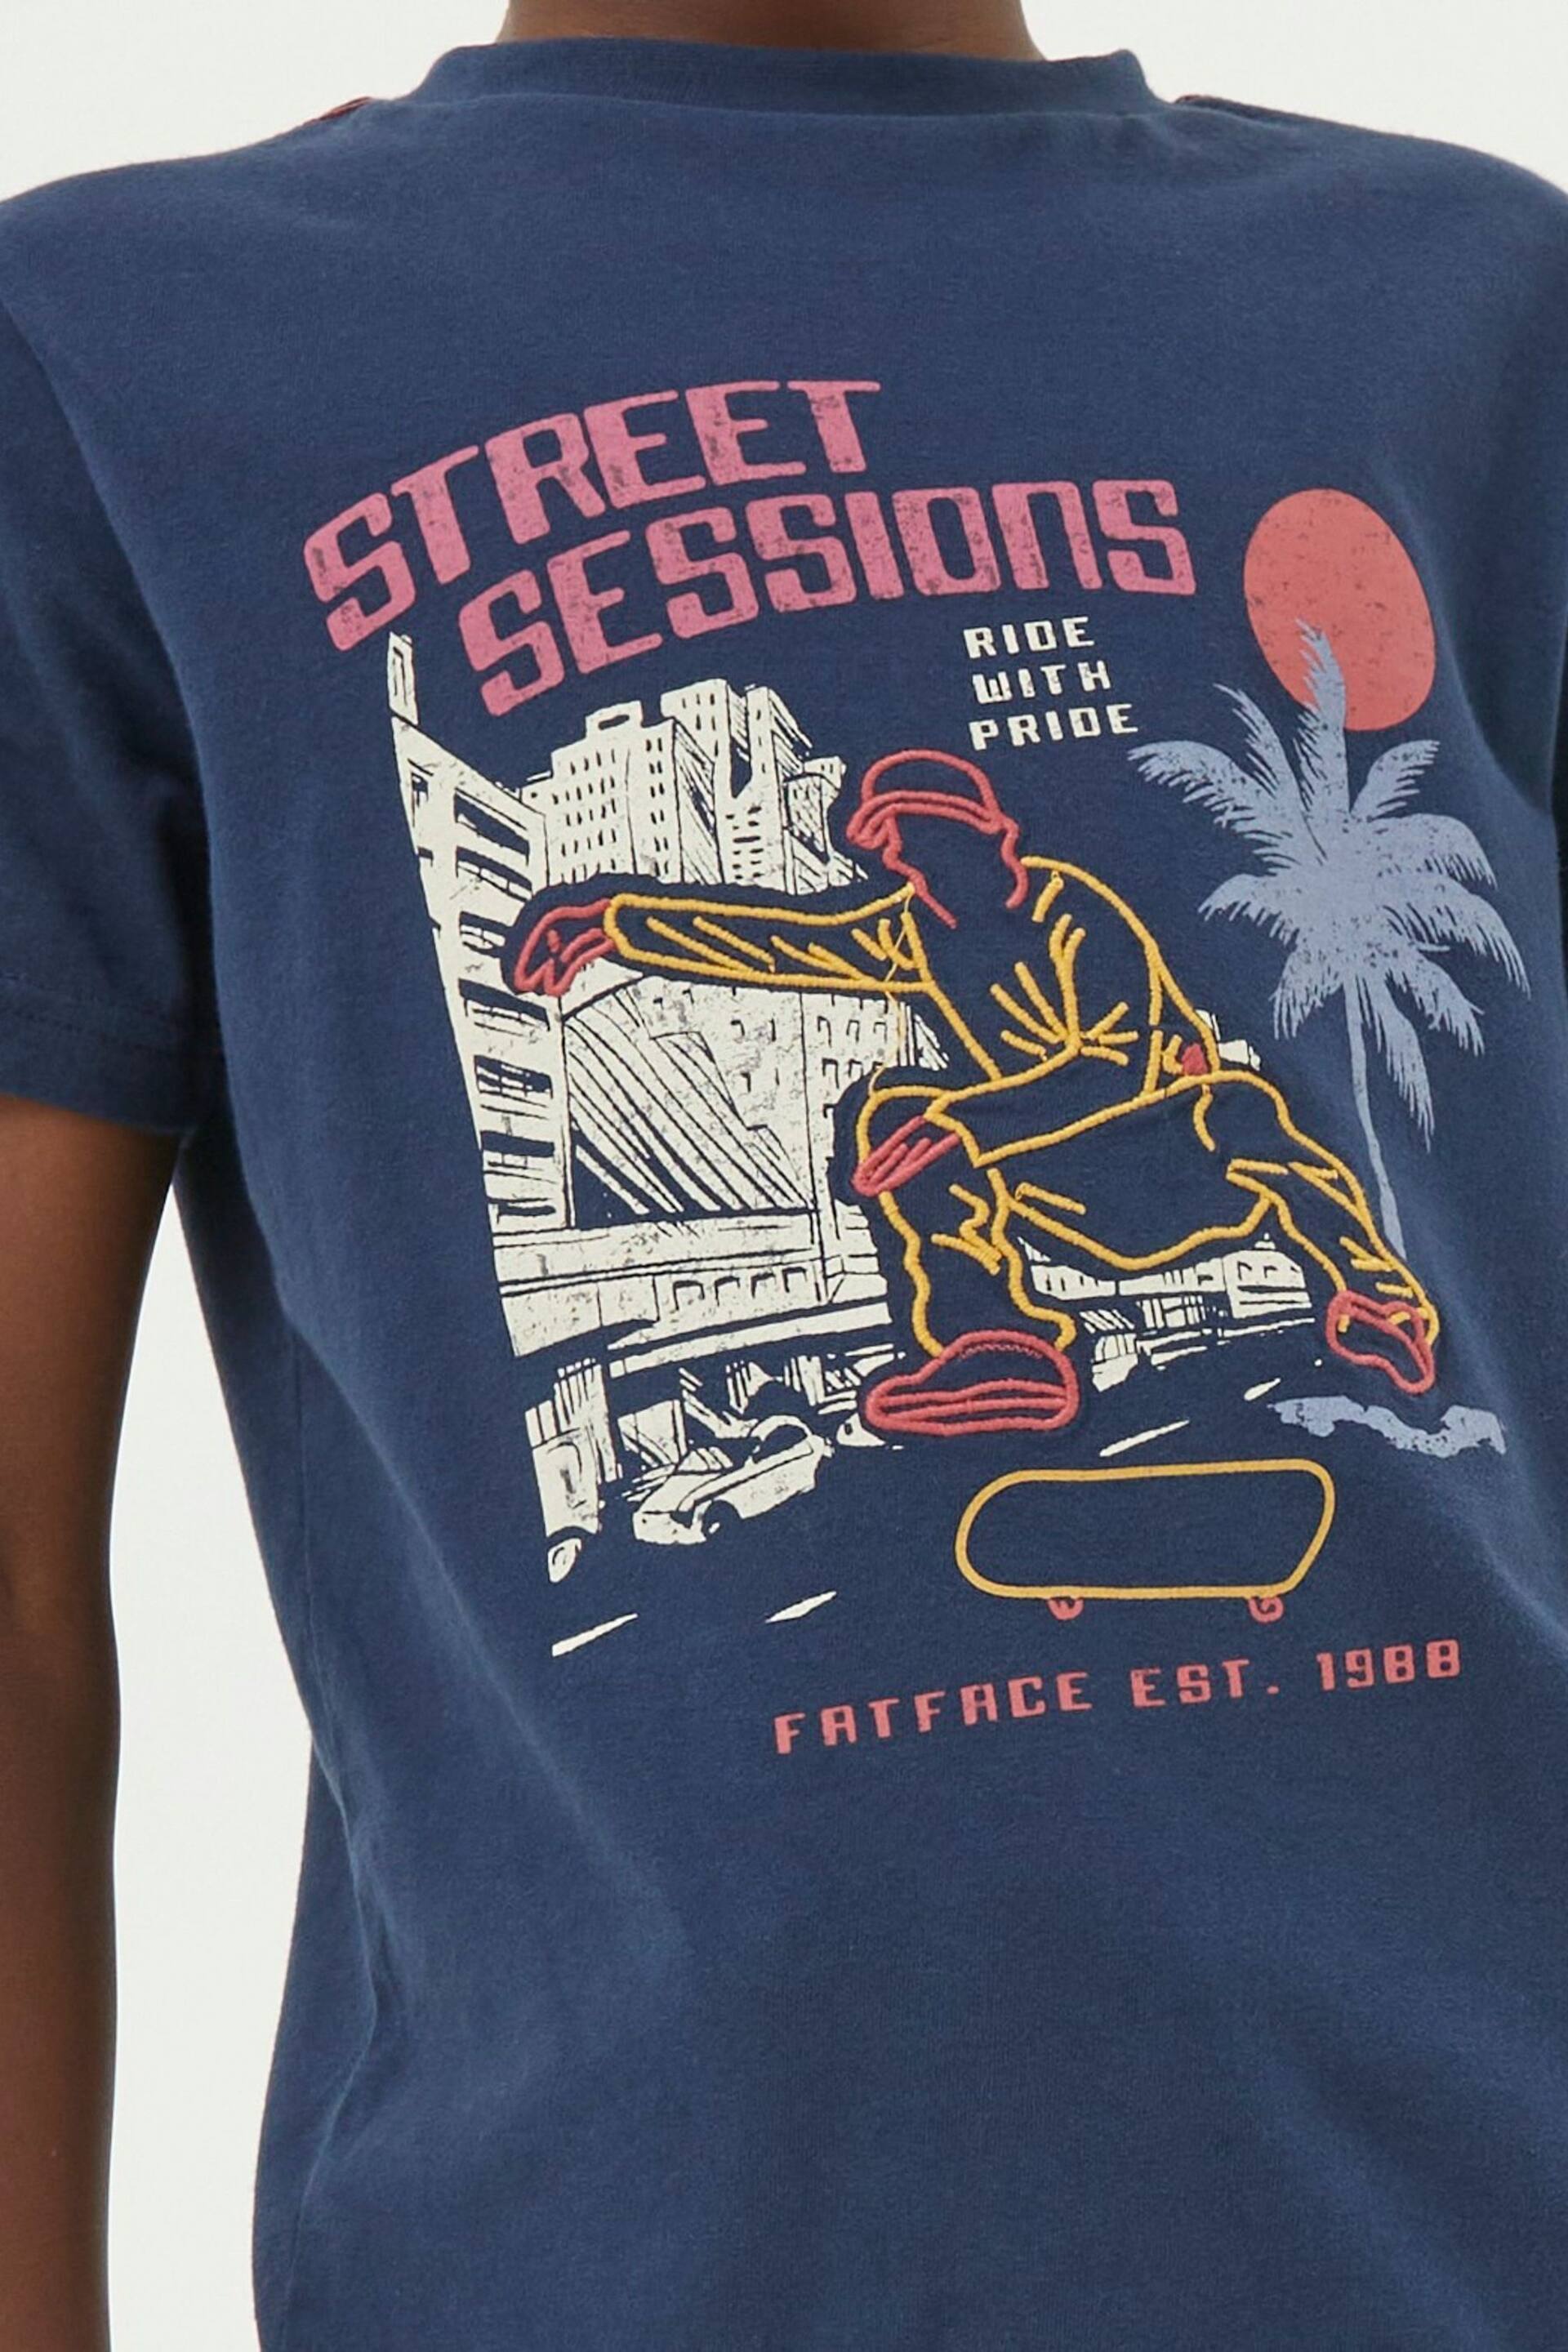 FatFace Blue Street Sessions Jersey T-Shirt - Image 3 of 4